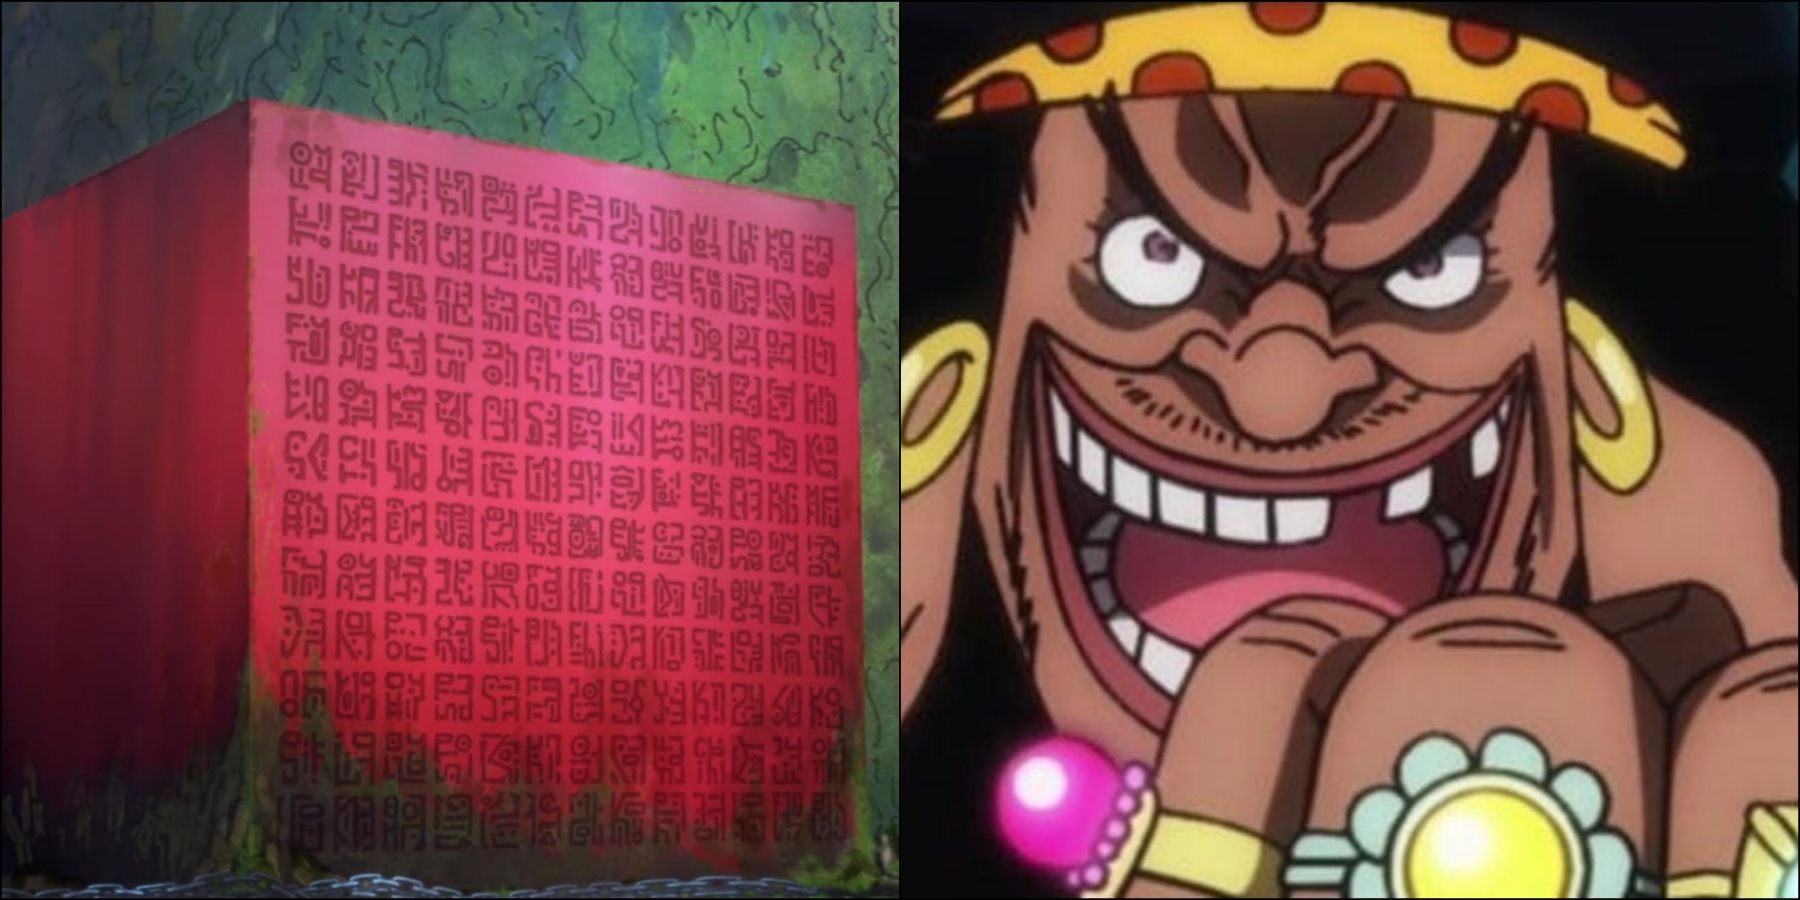 Queen of the Damned — Could the last road poneglyph be with Jinbe